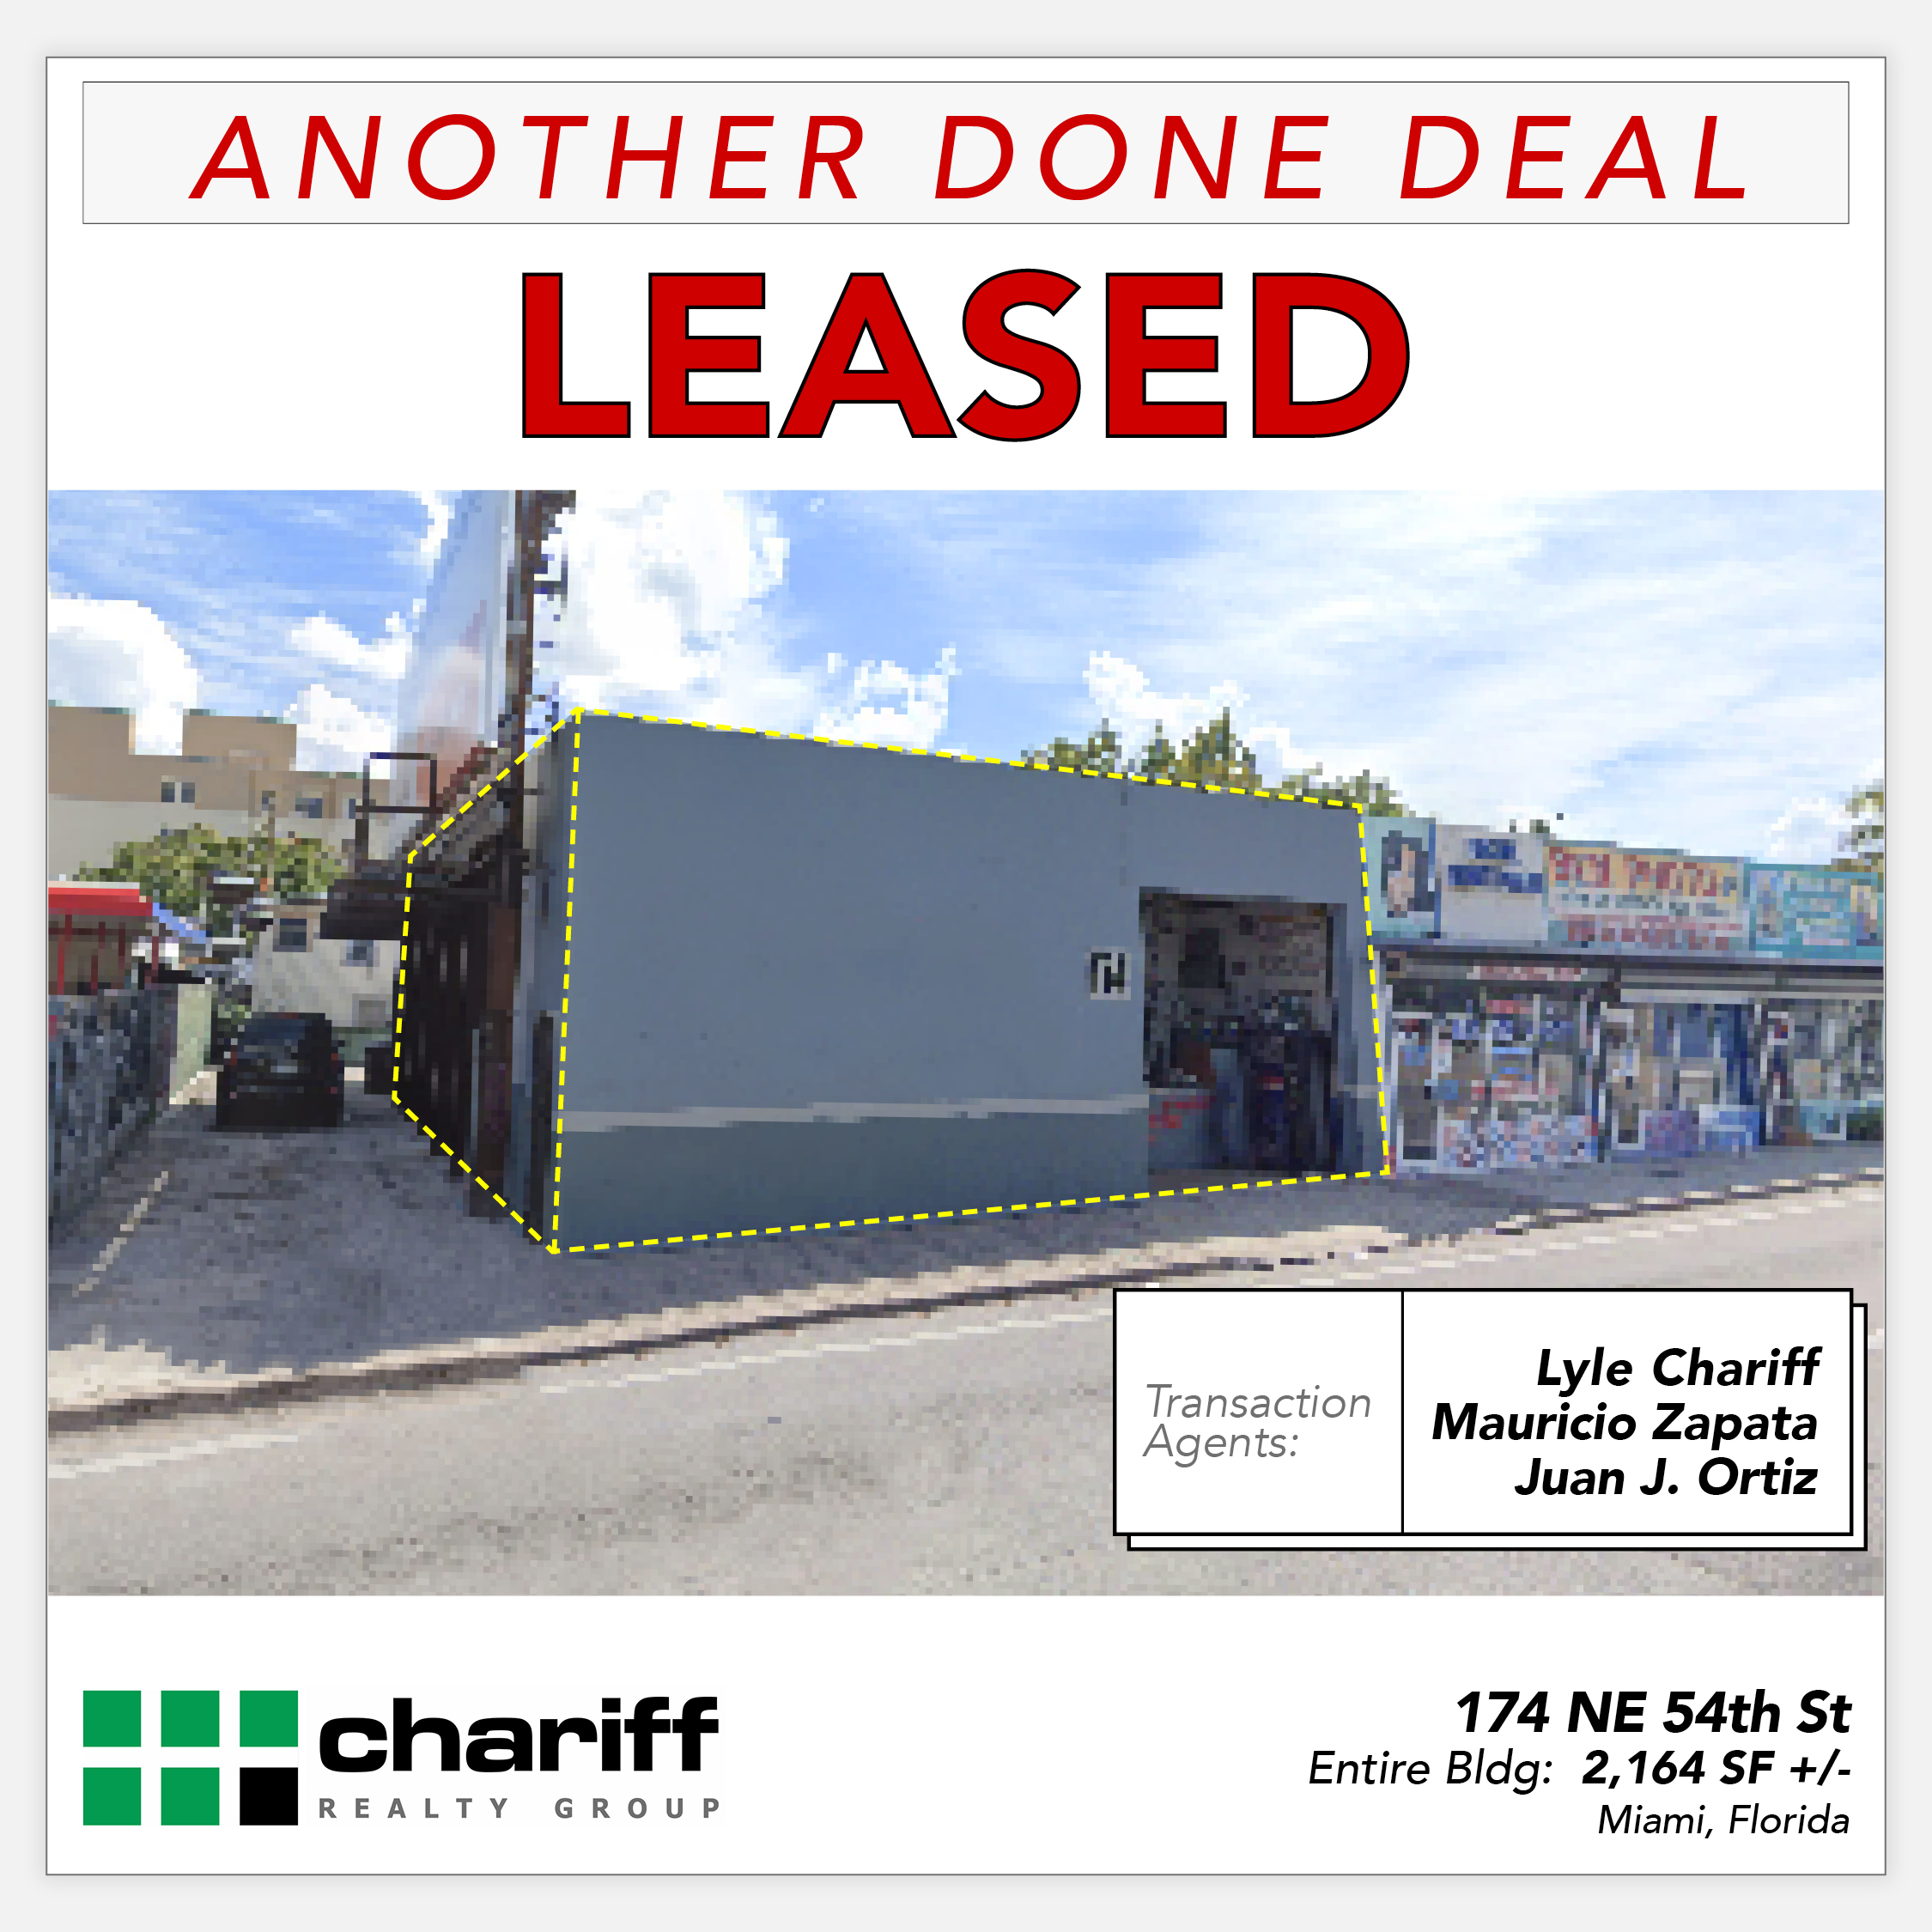 174 NE 54th St - Another Done Deal- Leased - Little Haiti -Miami-Florida-33137-Chariff Realty Group